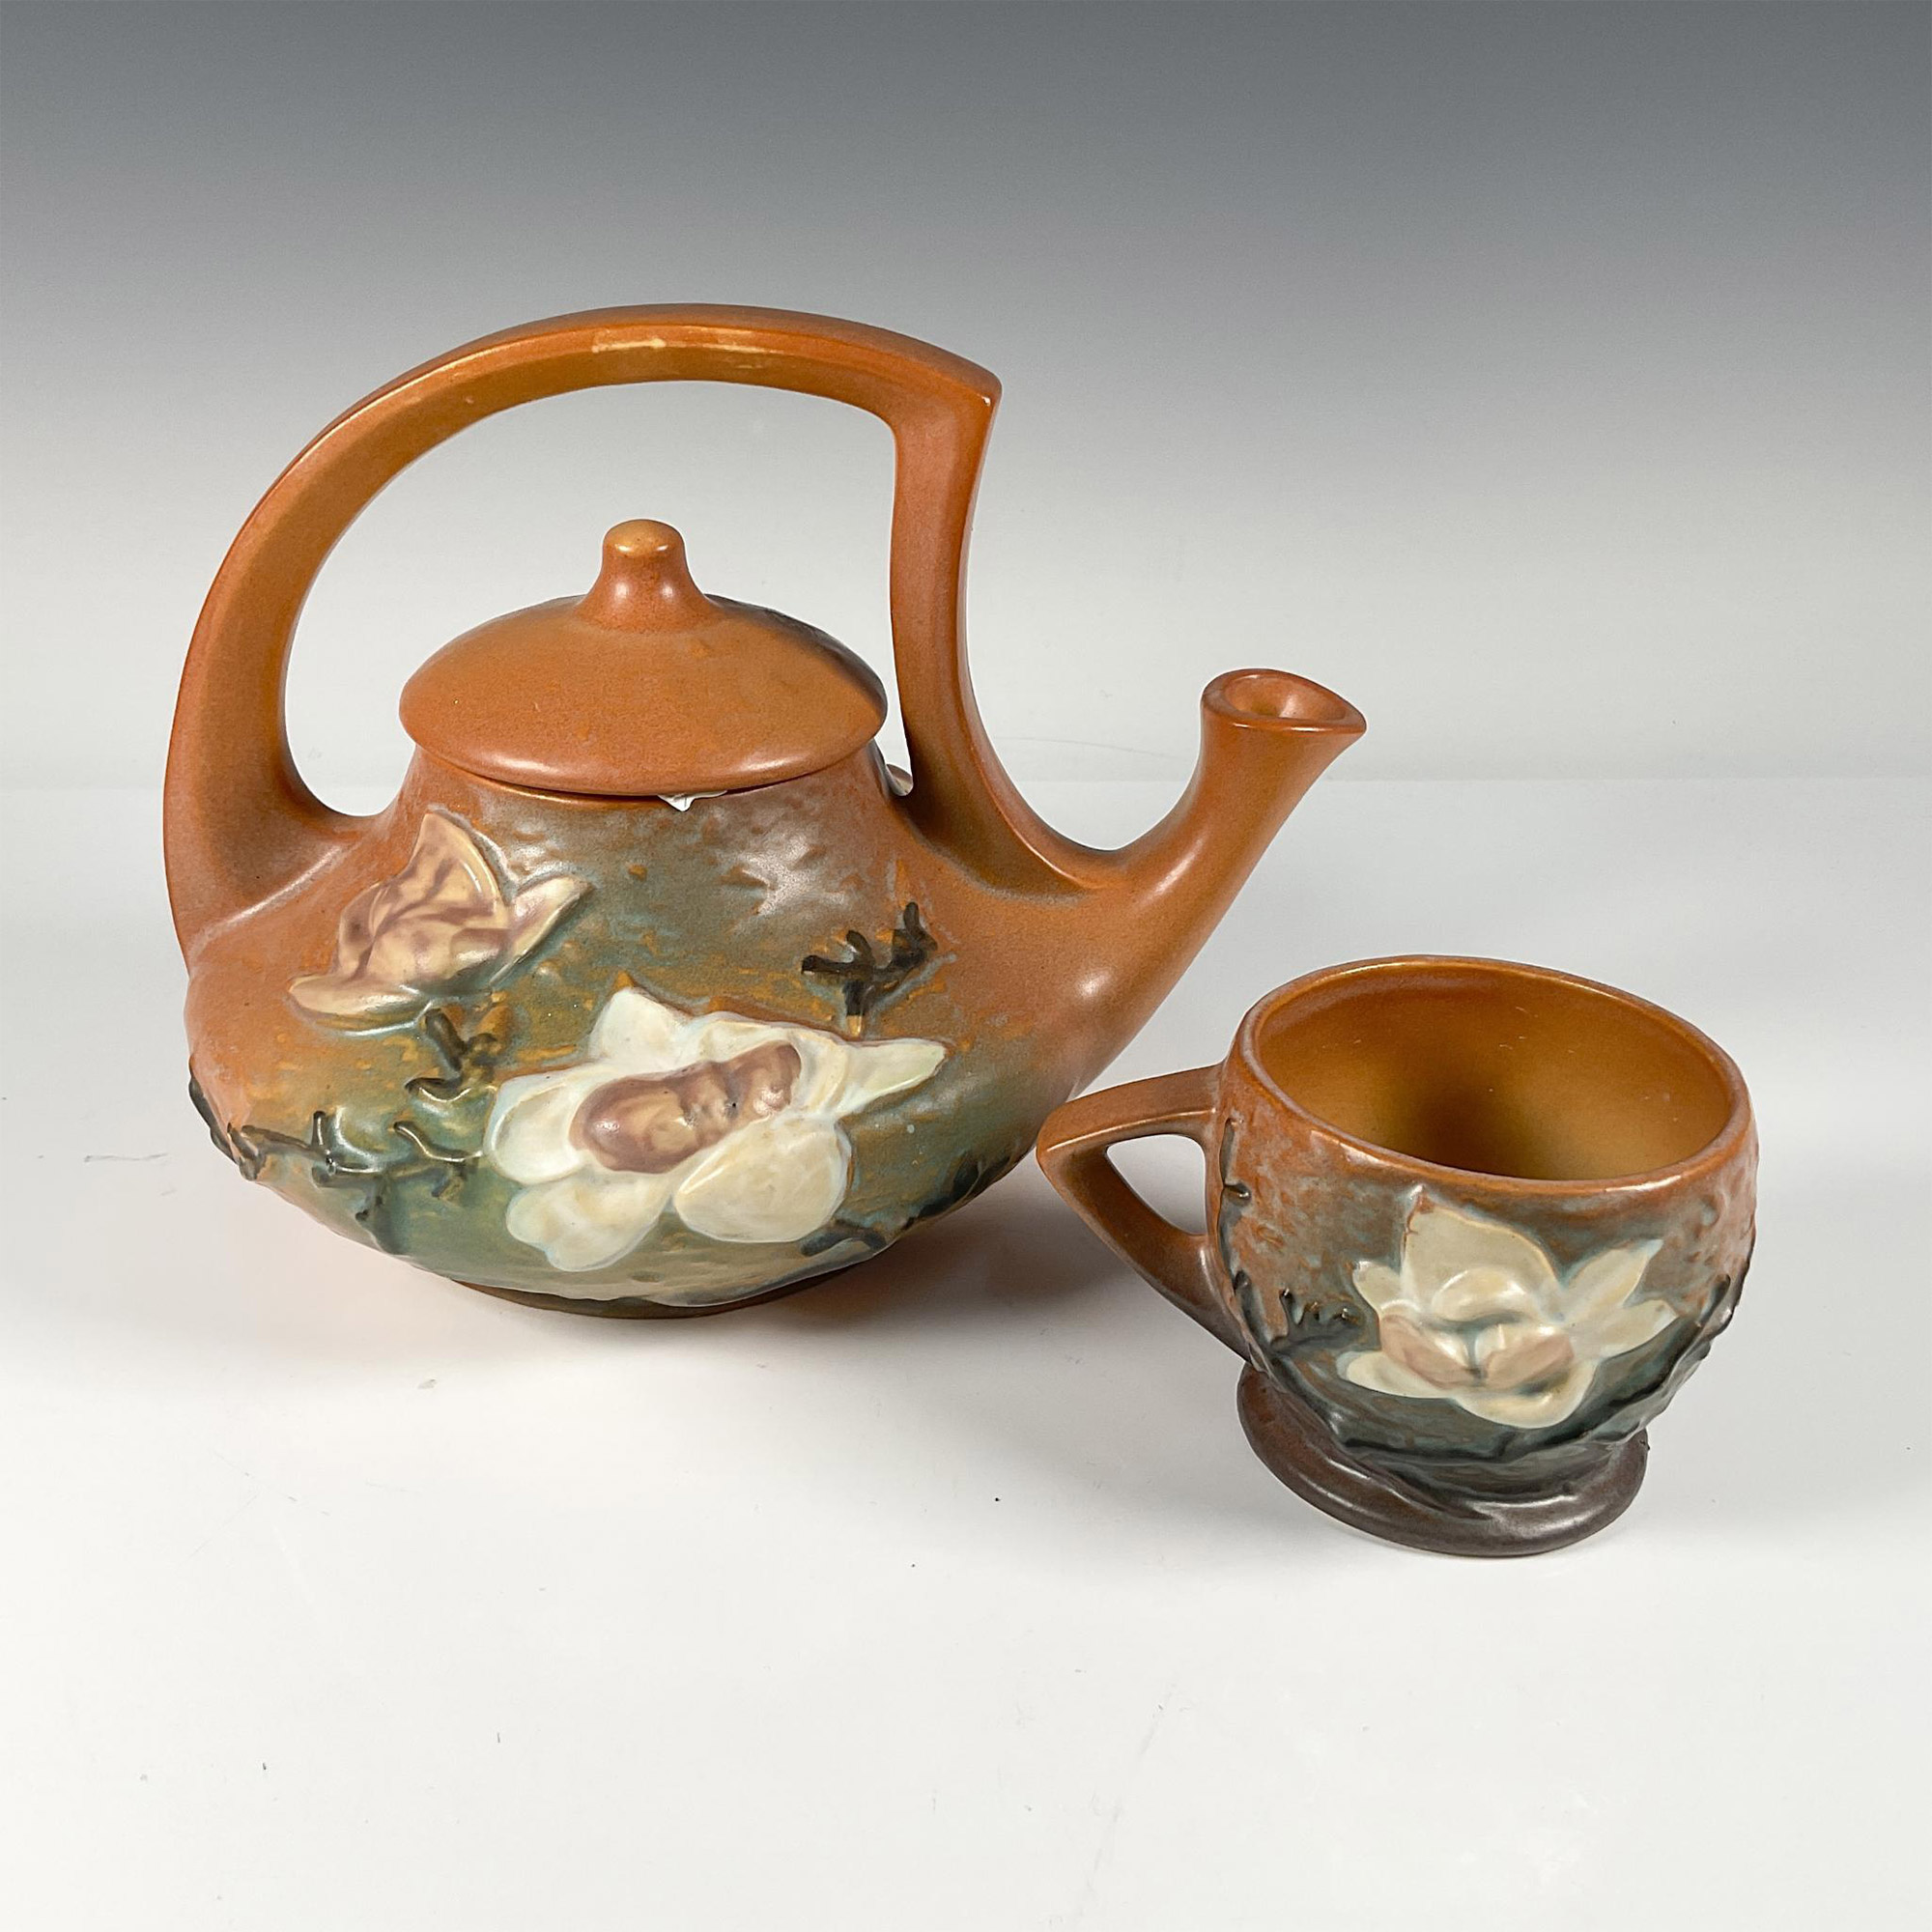 Roseville Pottery, Brown Magnolia Tea Pot and Cup - Image 2 of 3